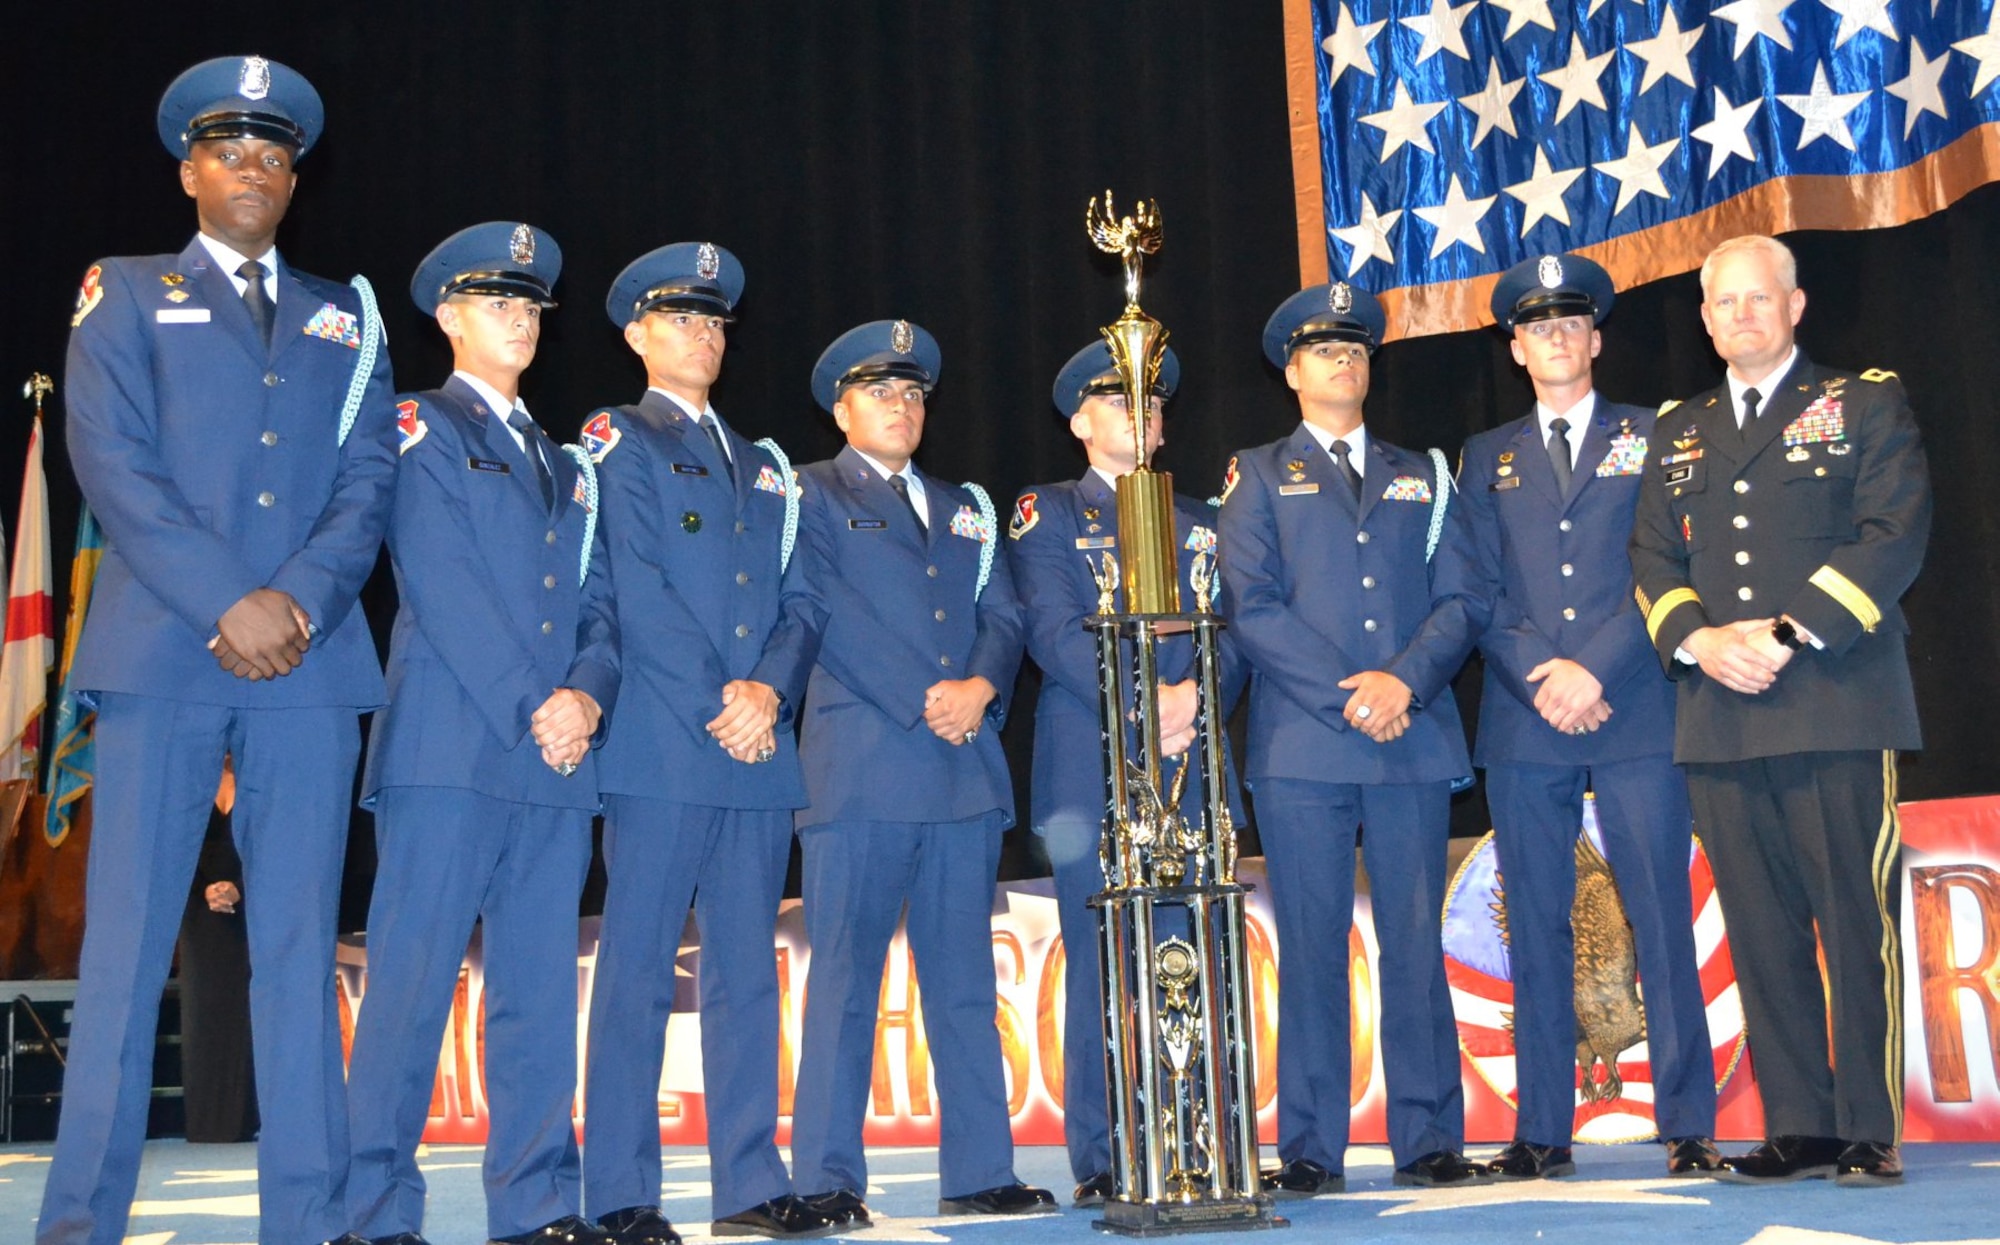 John Jay Silver Eagles from Jay High School in San Antonio stand together after winning their fourth national title in five years at the National High School Drill Team Competition, May 3-5, 2019, at Daytona Beach, Fla. The competition was a three-day event where 68 Junior Reserve Officer Training Corps drill teams from all services compete against one another for titles in more than 50 events.  U.S. Army Maj. Gen. John R. Evans Jr., Army Cadet Command commander, presented the Silver Eagles’ trophy during the award ceremony.  In total, John Jay High School took home 22 trophies from the competition.